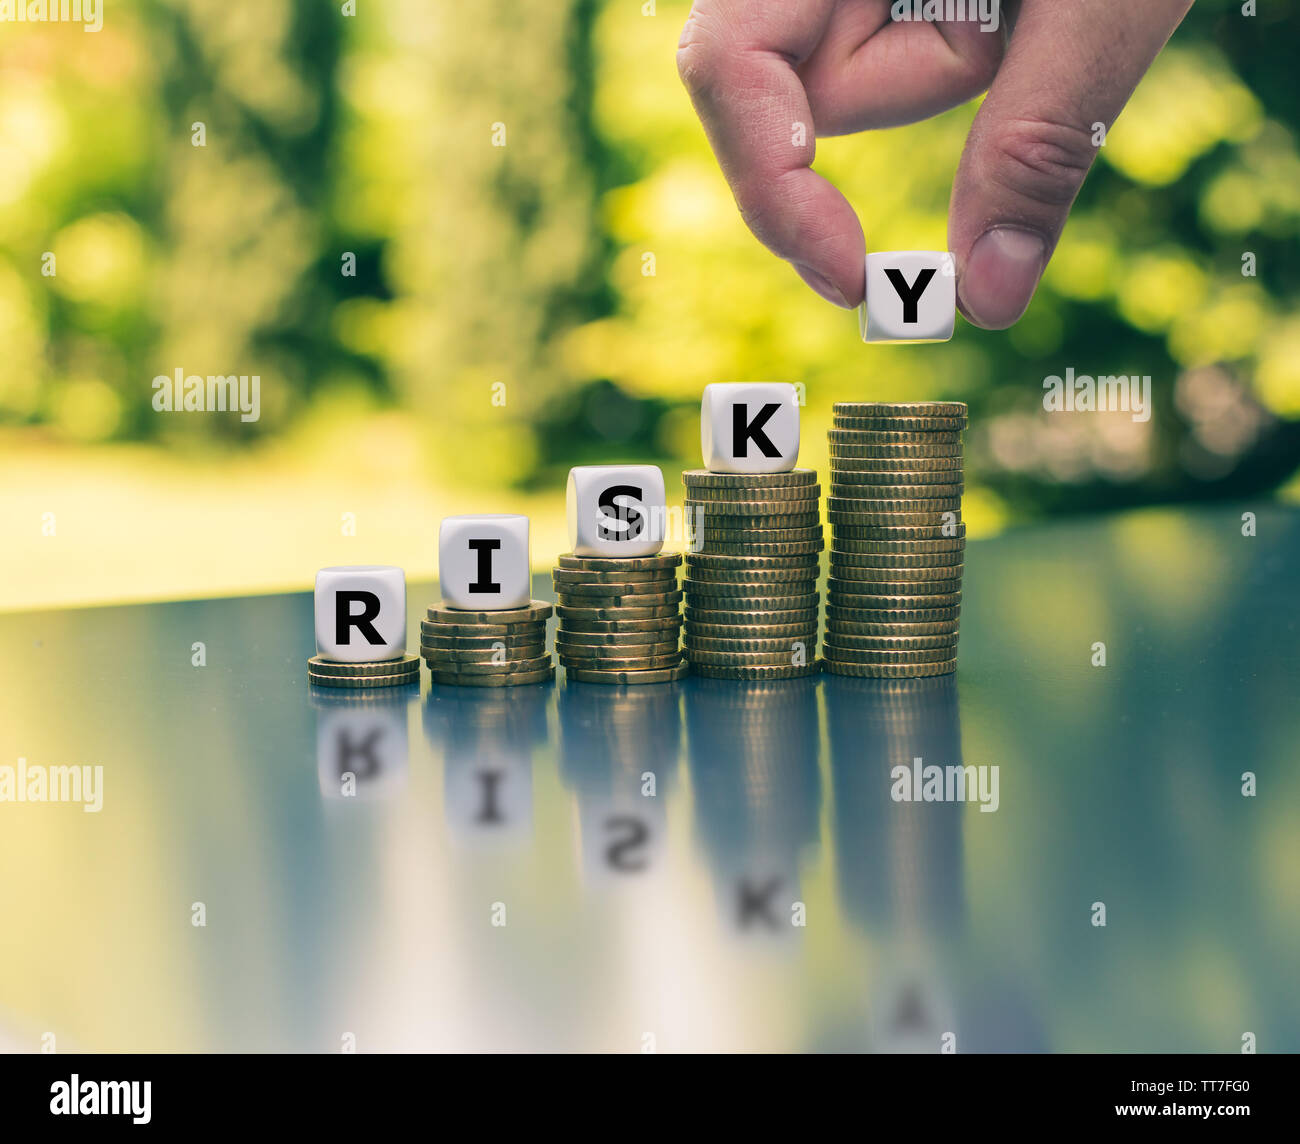 Concept of a increasing high financial risk. Dice placed on increasing high stacks of coins form the word 'risky'. Stock Photo